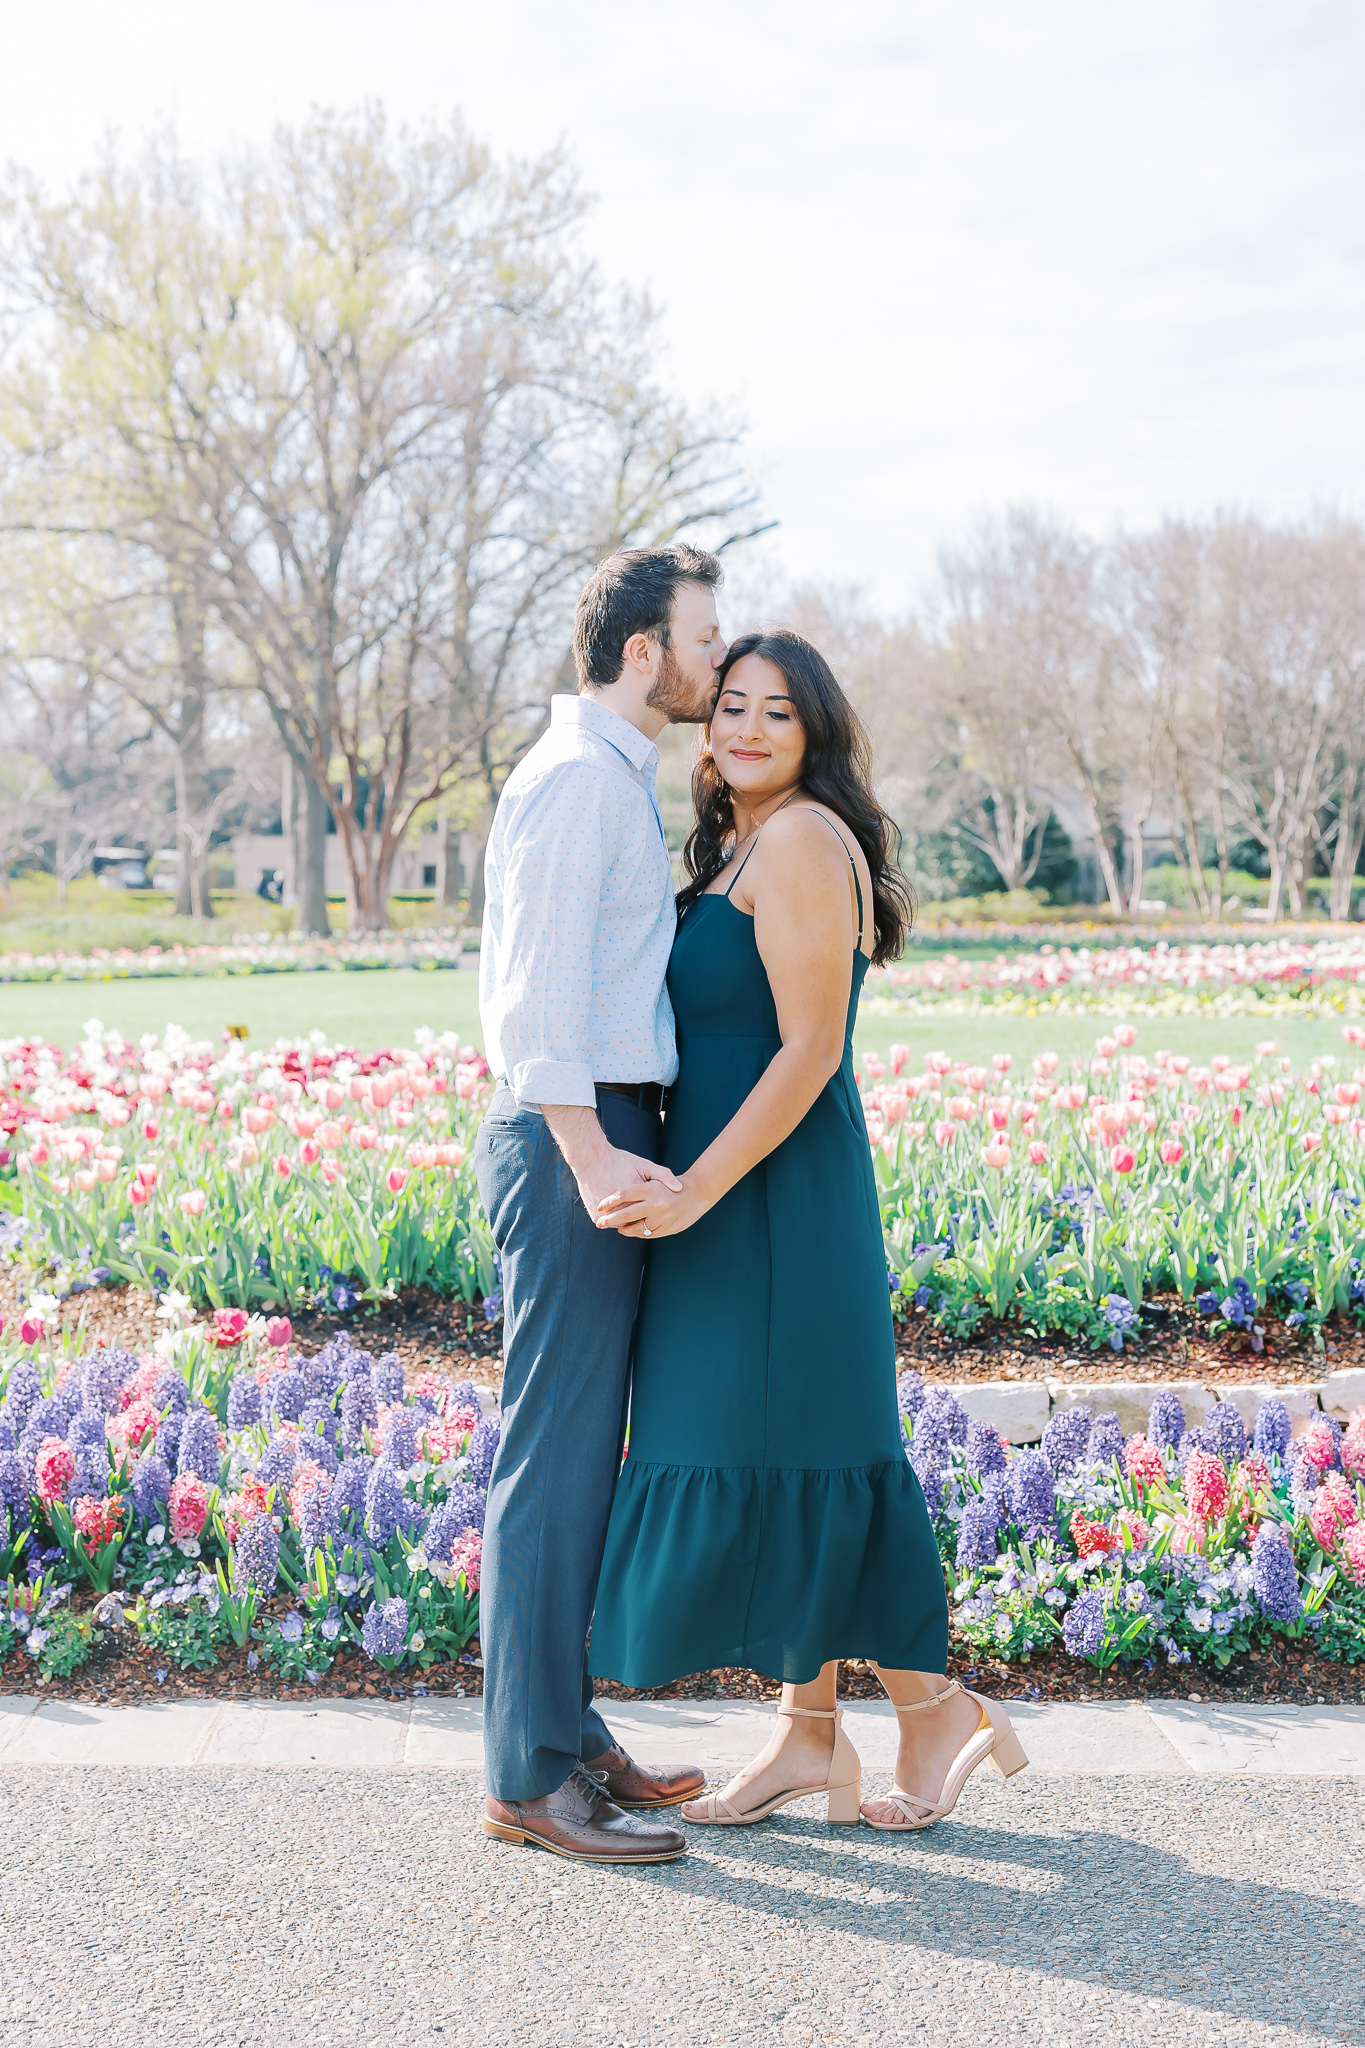 dallas arboretum engagement session, dallas arboretum, dallas arboretum engagement, dallas engagement session, dallas engagement photographer, dallas wedding photographer, brides of north texas, the knotting hill place